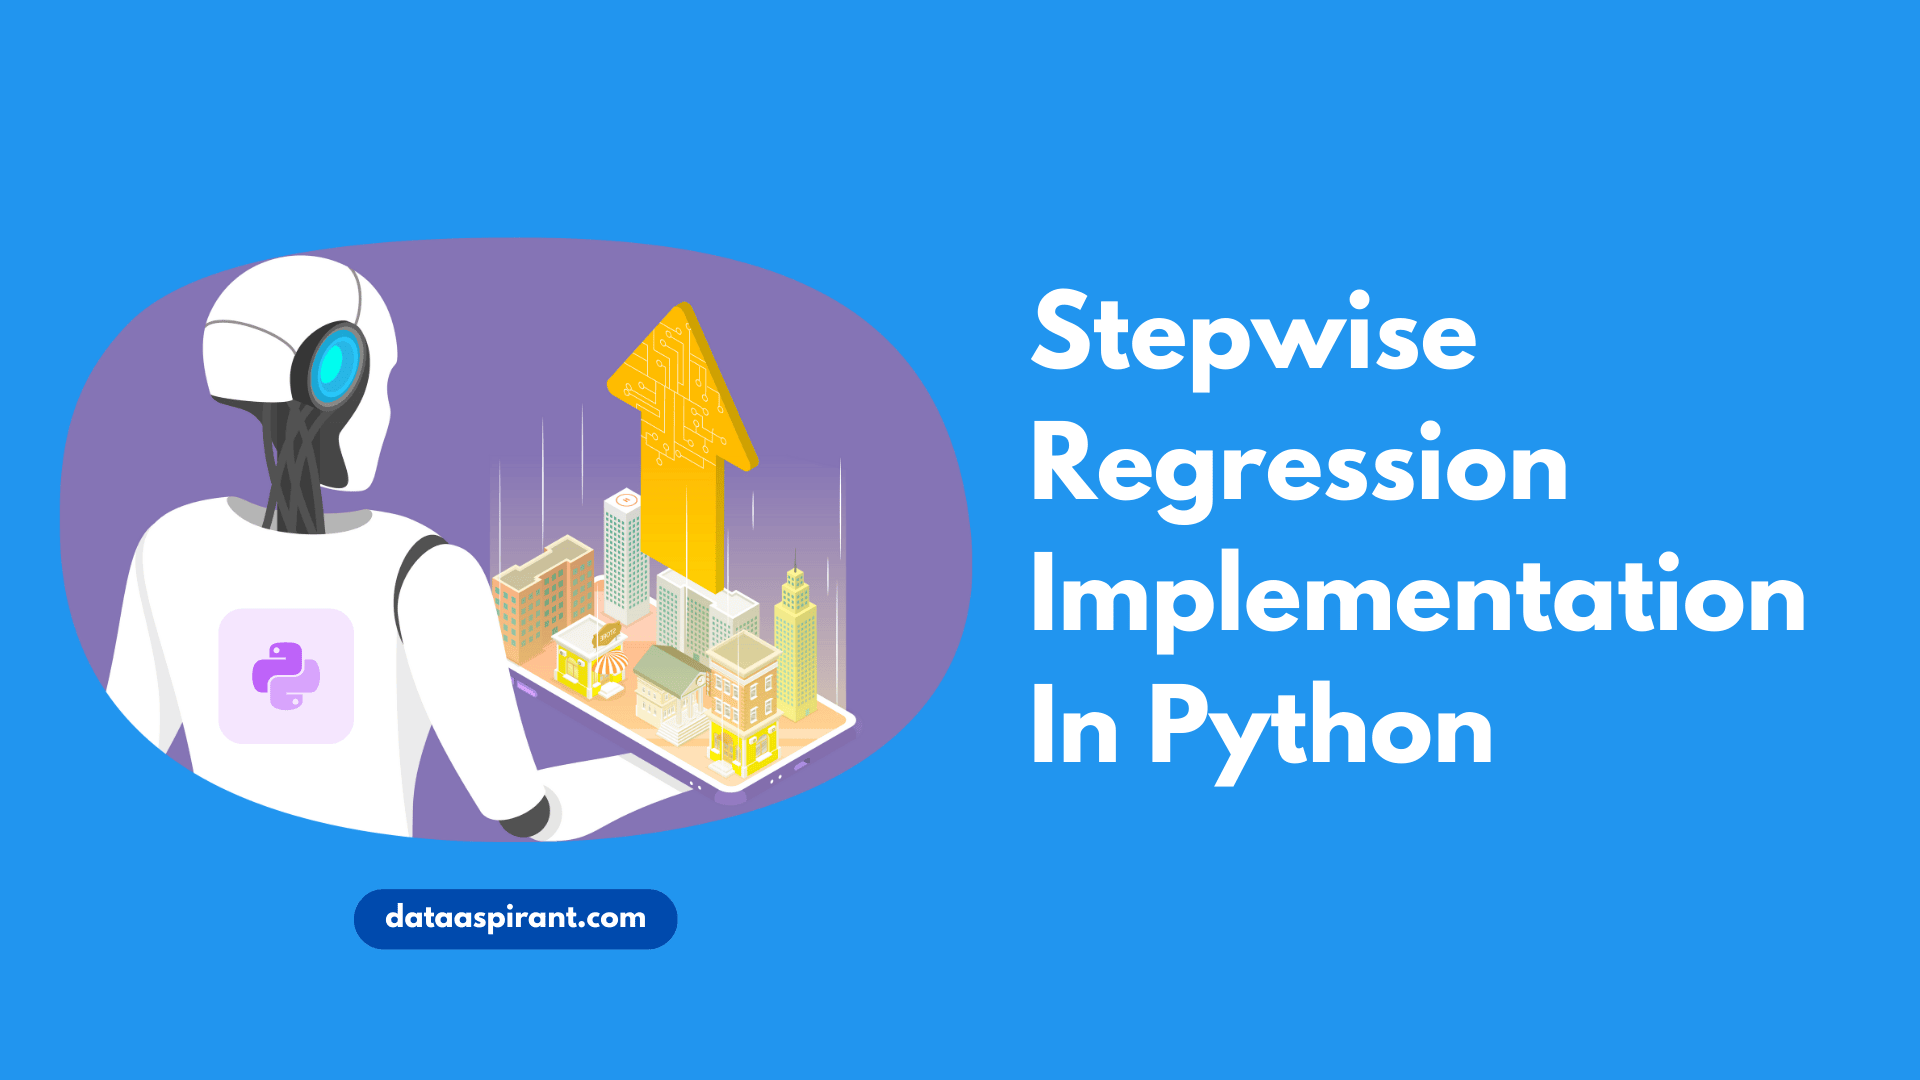 Stepwise Regression Implementation In Python